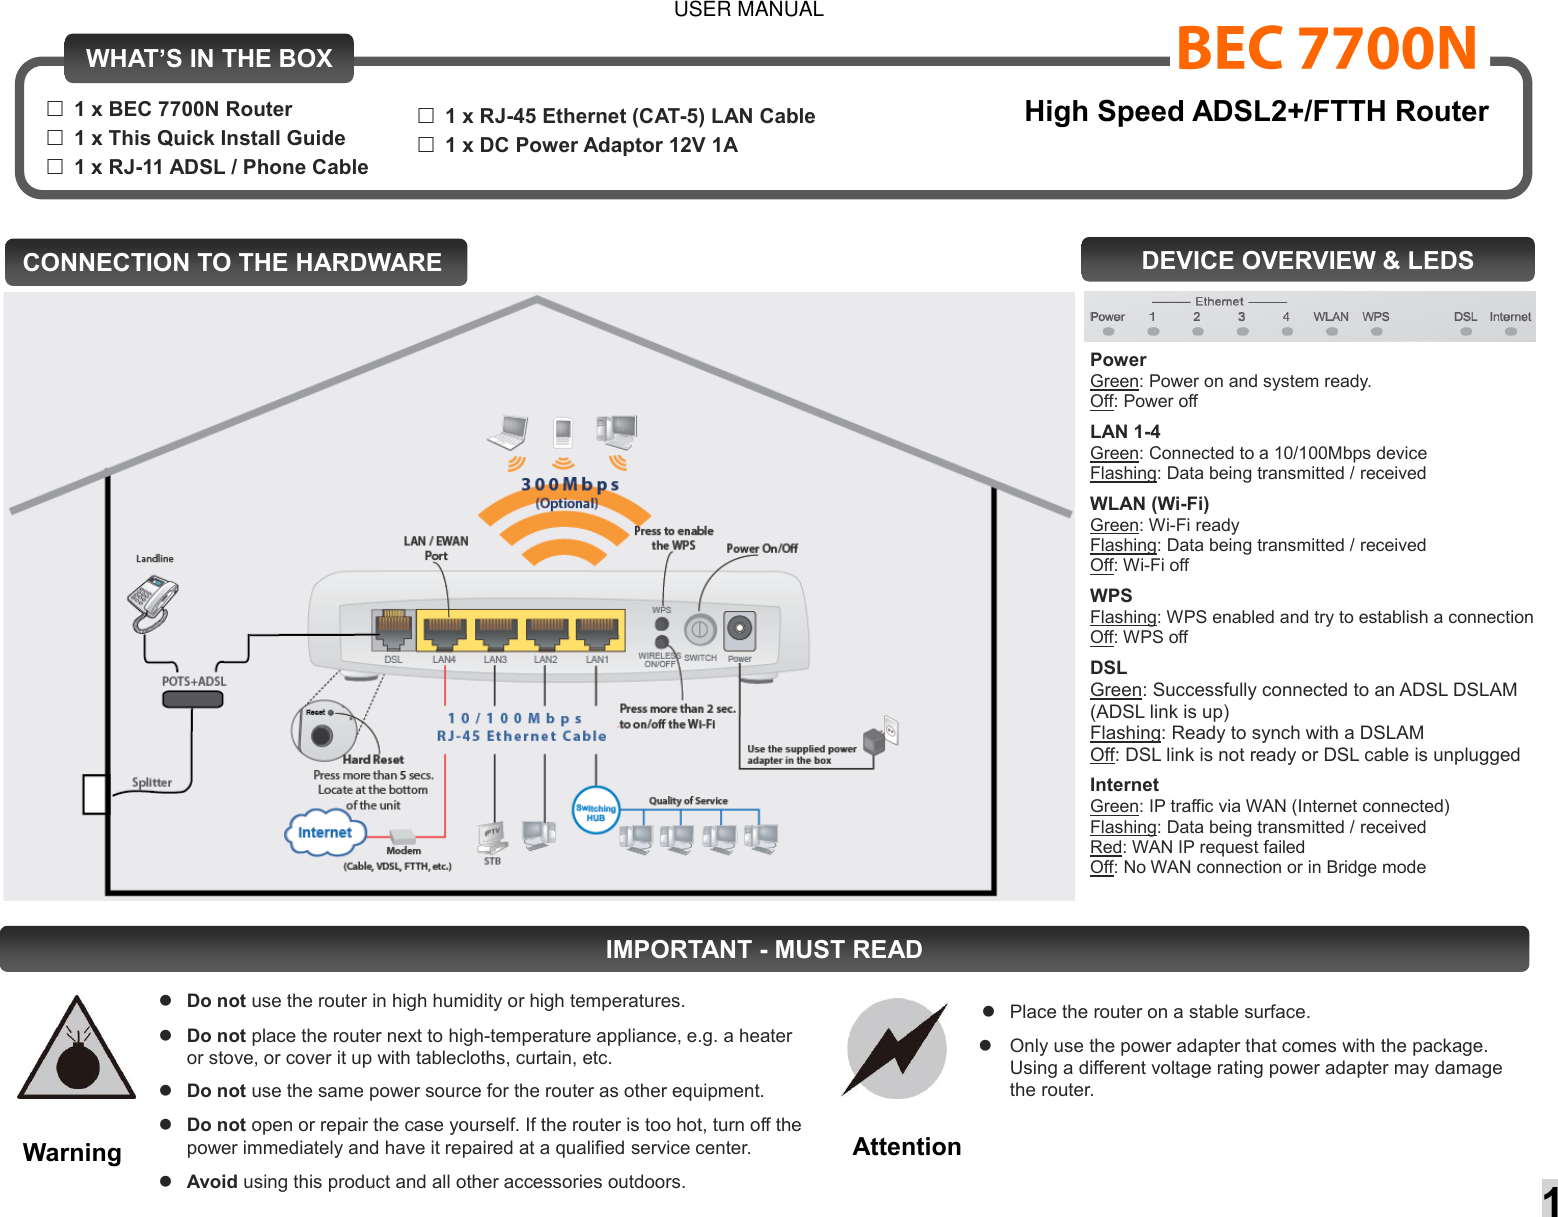   1   CONNECTION TO THE HARDWARE  High Speed ADSL2+/FTTH Router WHAT’S IN THE BOX 1 x BEC 7700N Router 1 x This Quick Install Guide 1 x RJ-11 ADSL / Phone Cable 1 x RJ-45 Ethernet (CAT-5) LAN Cable 1 x DC Power Adaptor 12V 1A  DEVICE OVERVIEW &amp; LEDS  Power  Green: Power on and system ready.   Off: Power off  LAN 1-4 Green: Connected to a 10/100Mbps device Flashing: Data being transmitted / received   WLAN (Wi-Fi)  Green: Wi-Fi ready Flashing: Data being transmitted / received  Off: Wi-Fi off  WPS Flashing: WPS enabled and try to establish a connection Off: WPS off  DSL Green: Successfully connected to an ADSL DSLAM (ADSL link is up) Flashing: Ready to synch with a DSLAM  Off: DSL link is not ready or DSL cable is unplugged  Internet Green: IP traffic via WAN (Internet connected) Flashing: Data being transmitted / received Red: WAN IP request failed Off: No WAN connection or in Bridge mode   IMPORTANT - MUST READ   Do not use the router in high humidity or high temperatures.  Do not place the router next to high-temperature appliance, e.g. a heater or stove, or cover it up with tablecloths, curtain, etc.  Do not use the same power source for the router as other equipment.  Do not open or repair the case yourself. If the router is too hot, turn off the power immediately and have it repaired at a qualified service center.  Avoid using this product and all other accessories outdoors.  Place the router on a stable surface.  Only use the power adapter that comes with the package.  Using a different voltage rating power adapter may damage the router. Warning Attention USER MANUAL